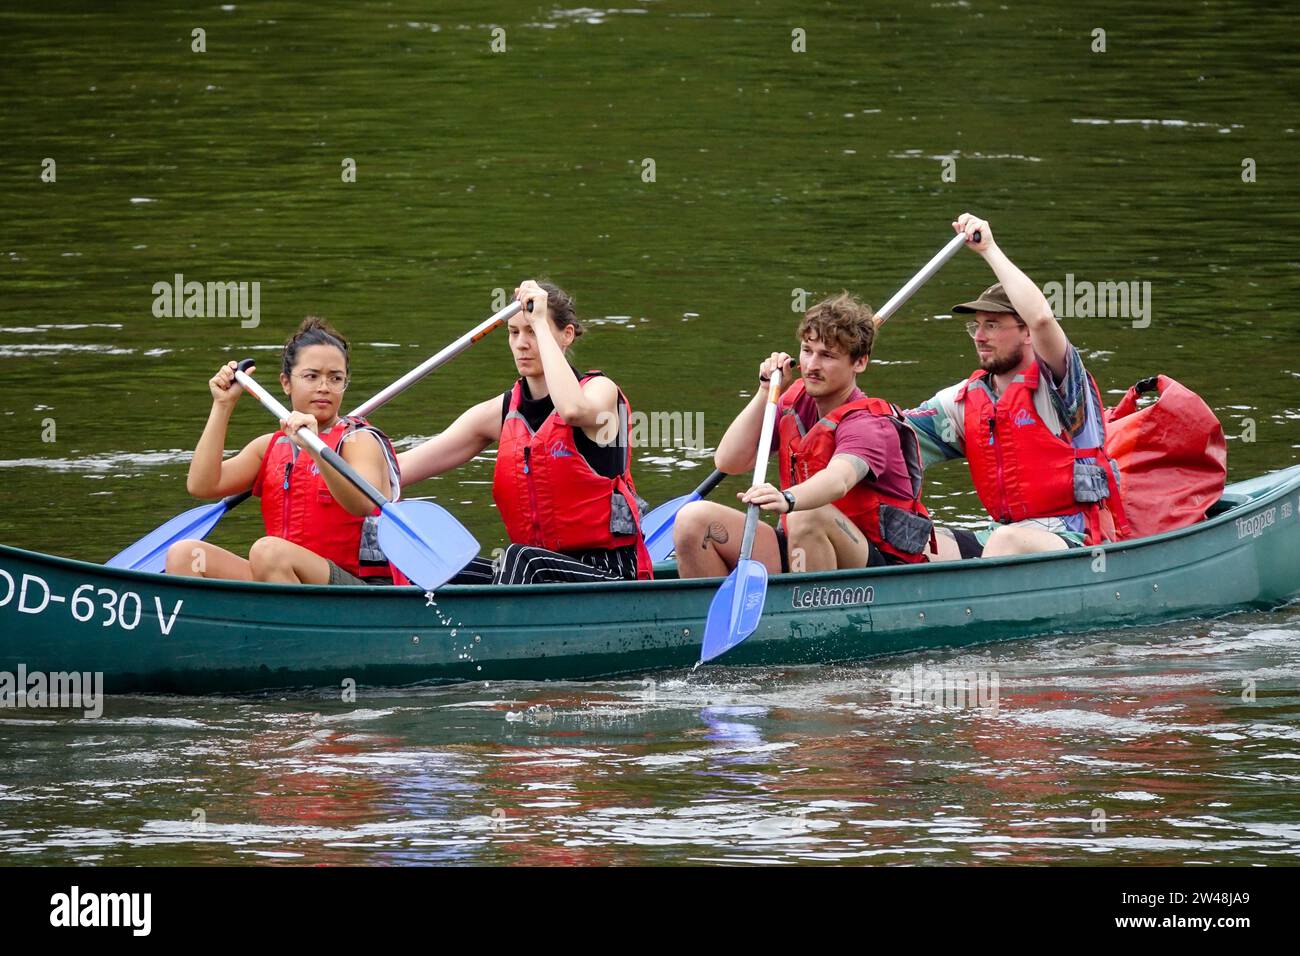 Friends Canoeing Elbe River People canoeing Summer Elbe River Germany Twenties People 20s young adults Germany Activities women Men Together paddling Stock Photo